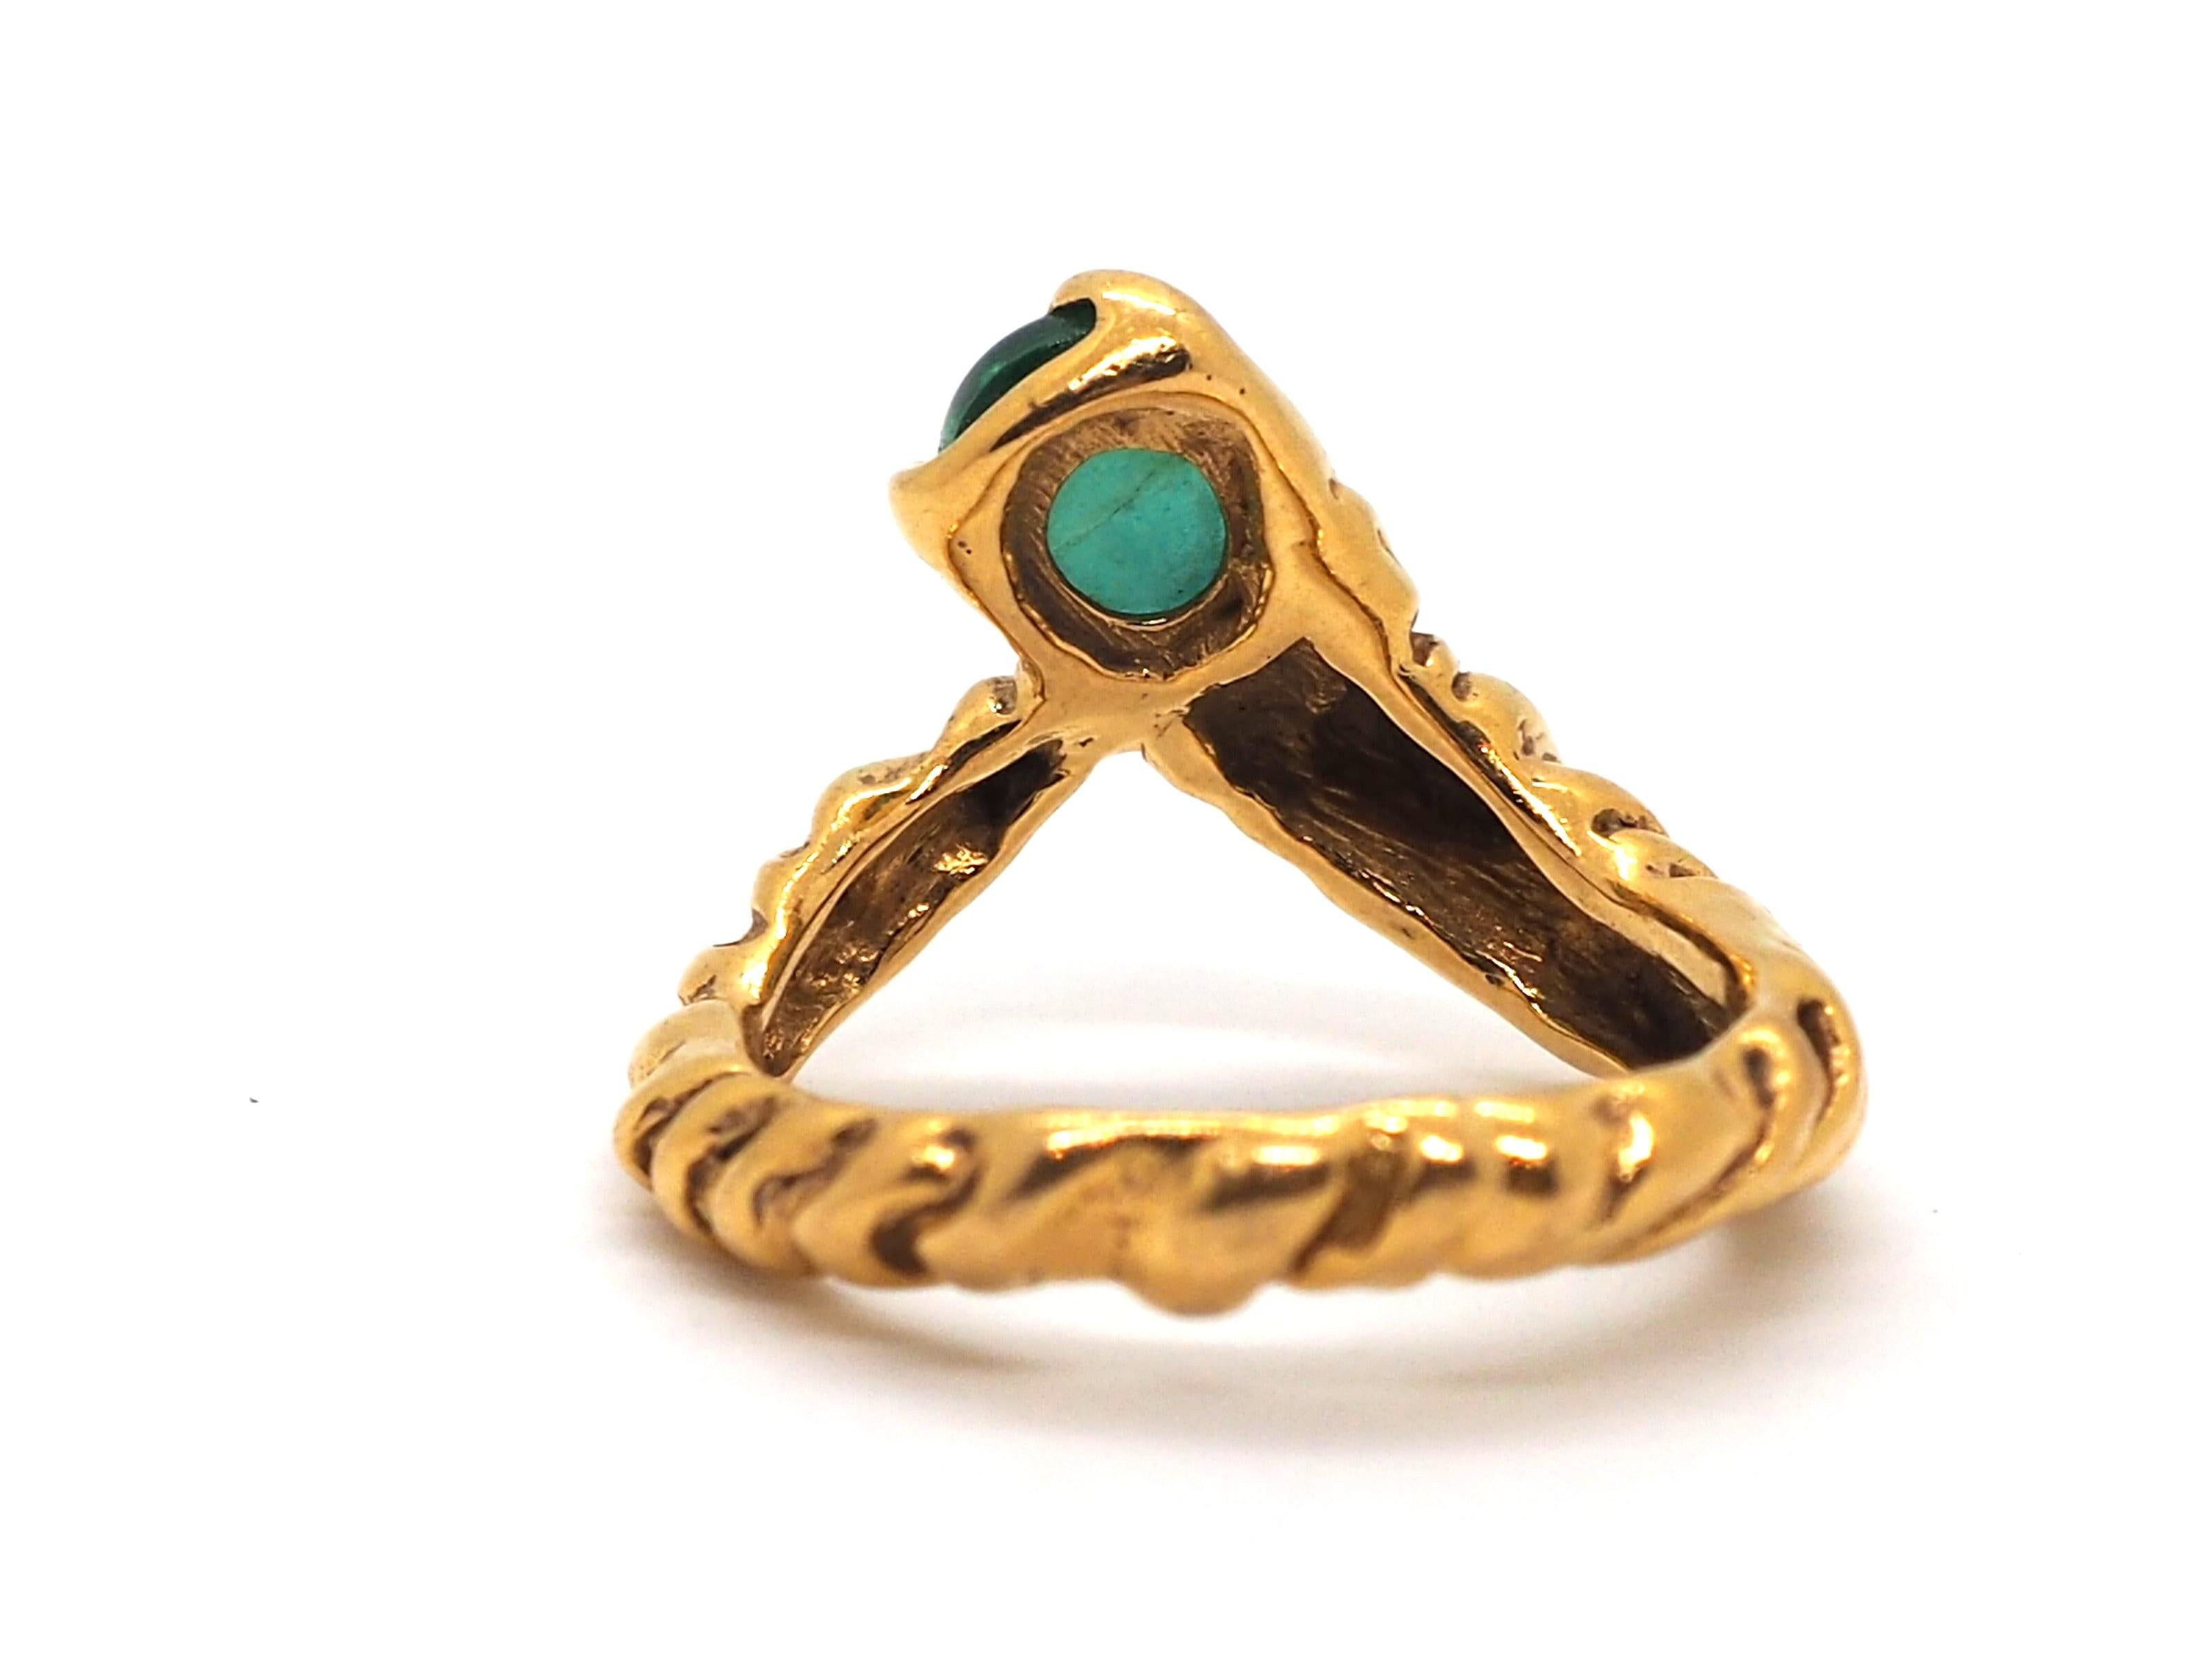 Beautiful ring by Gilbert Albert, with his characteristic style inspired in the nature, made of 18 karats yellow gold, decorated with one oval shape emerald of 7,64mm x 6.10mm. 

This ring will bring elegance and sophistication to any style. A real